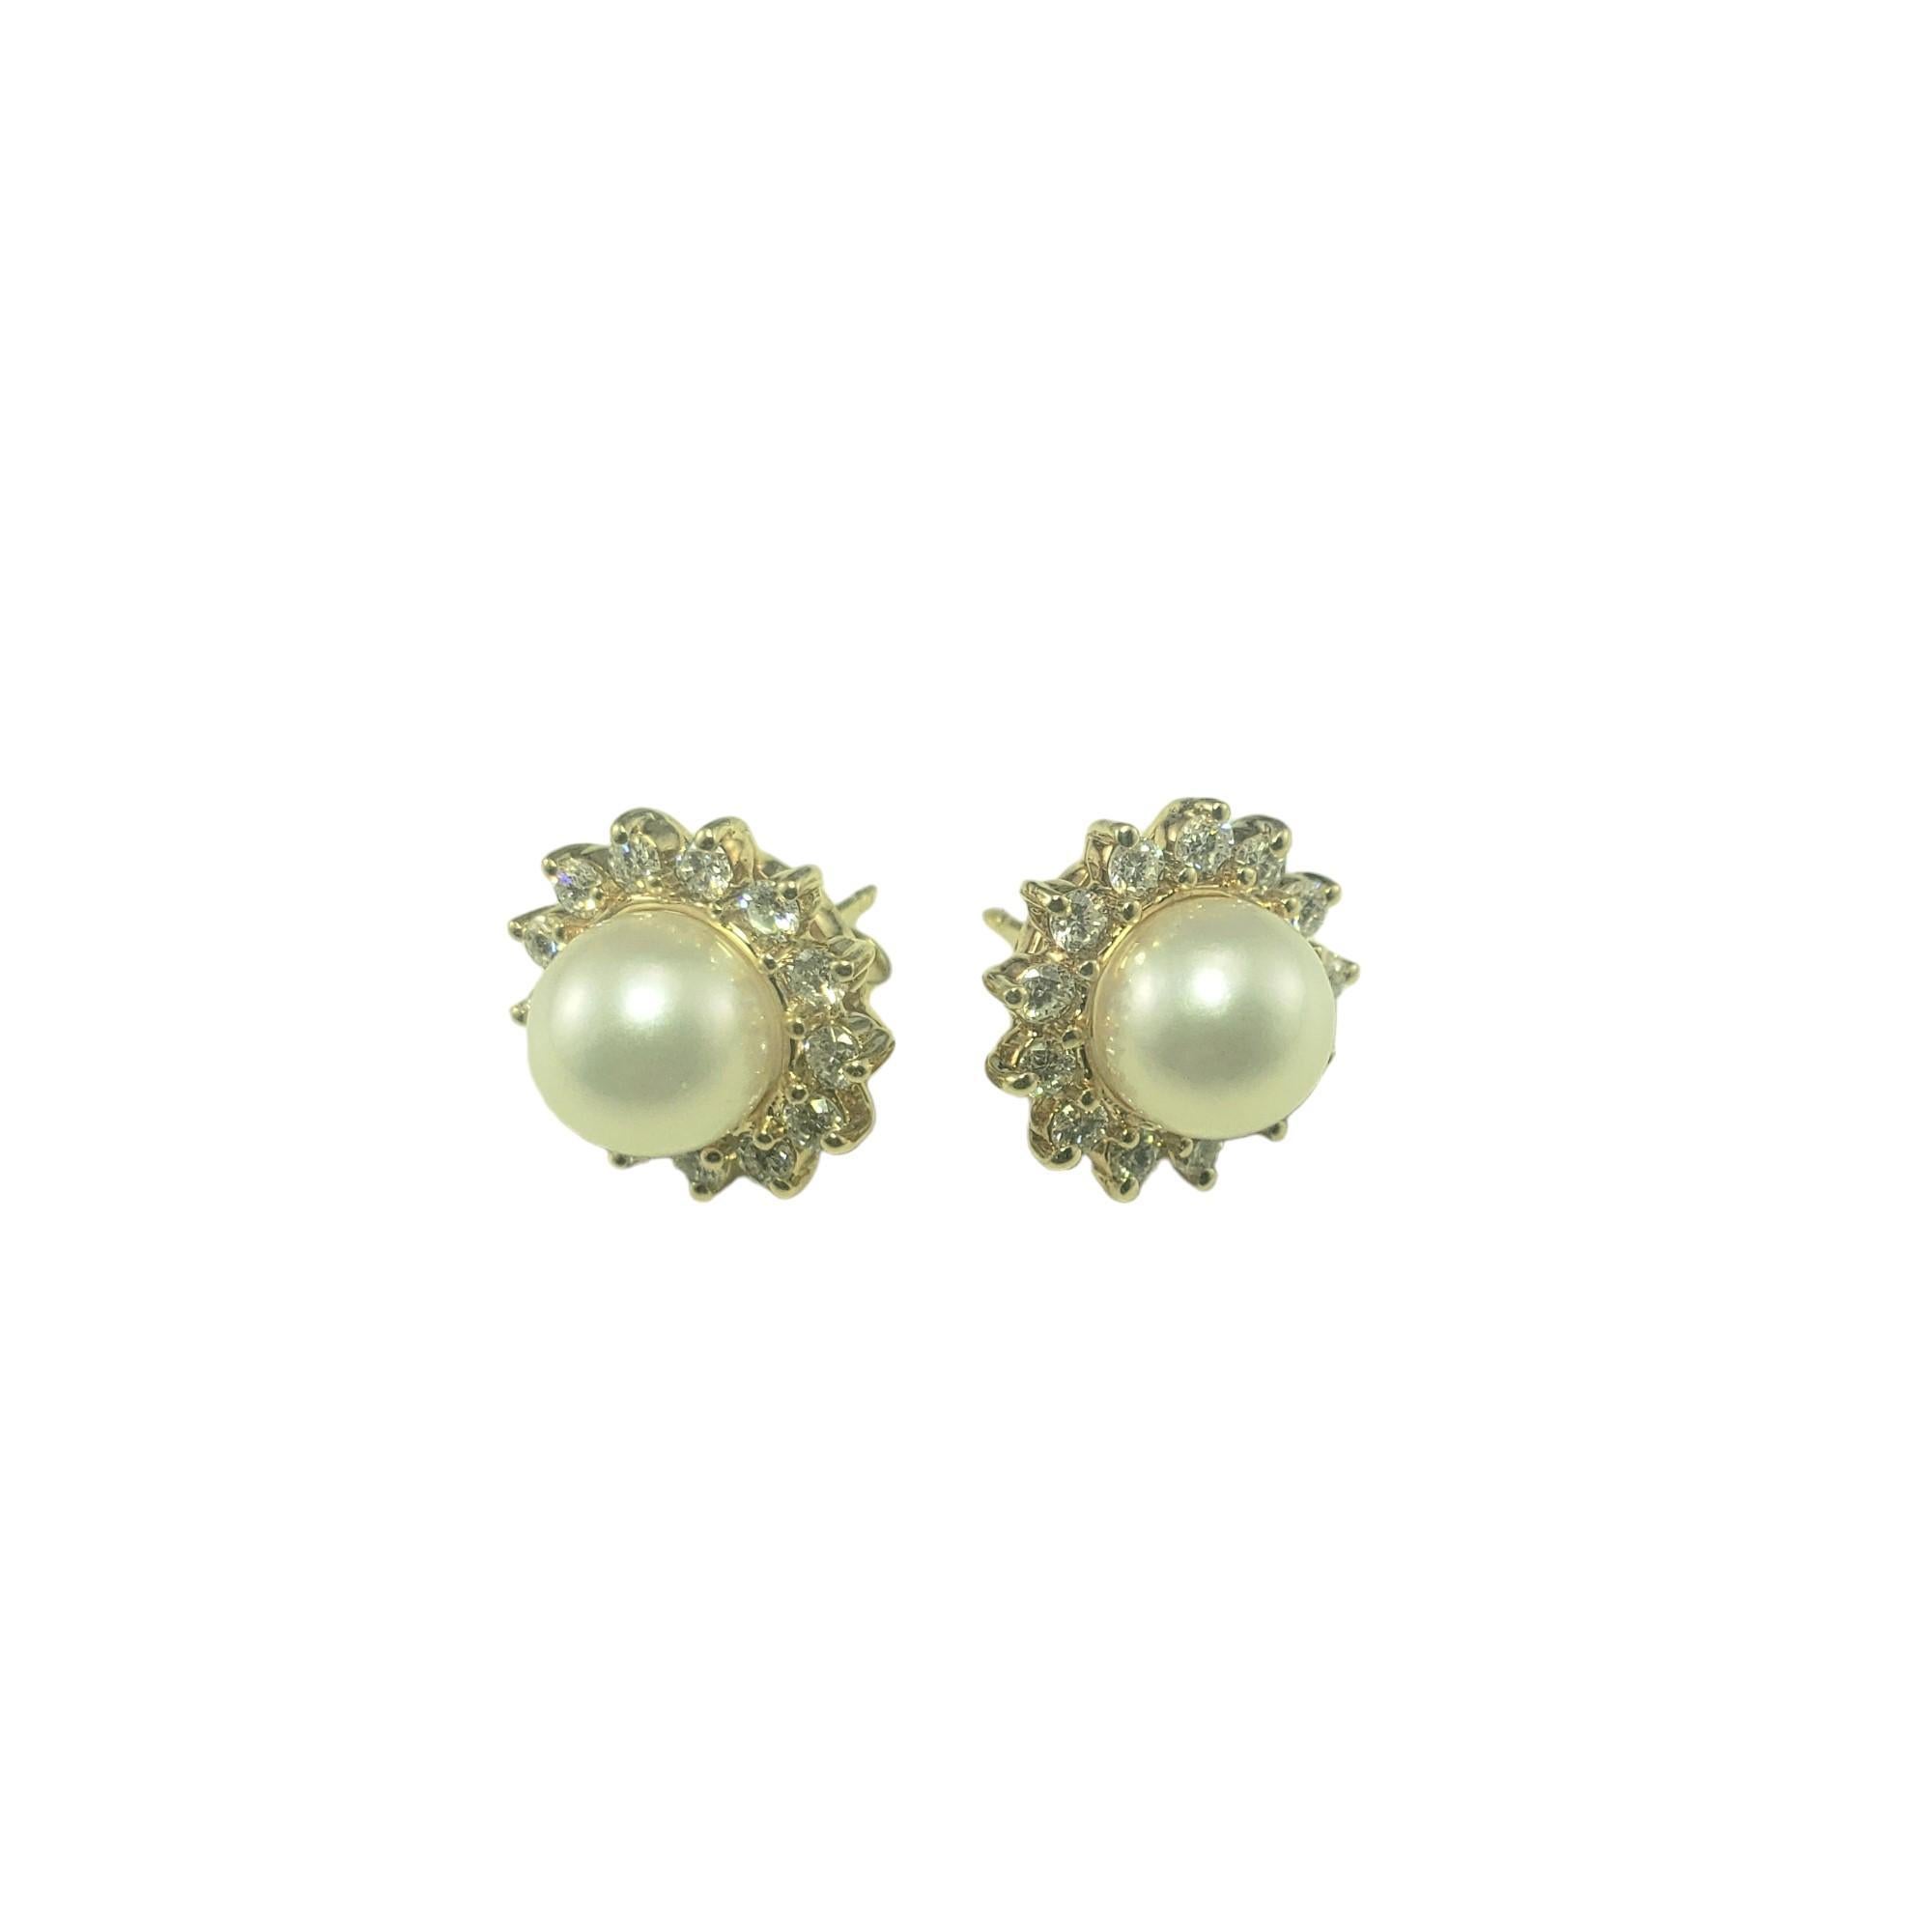 Vintage 14 Karat Yellow Gold Pearl and Diamond Earrings-

These stunning earrings each feature one round pearl (8 mm) surrounded by 13 round brilliant cut diamonds set in classic 14K yellow gold.  Push back closures.

Approximate total diamond